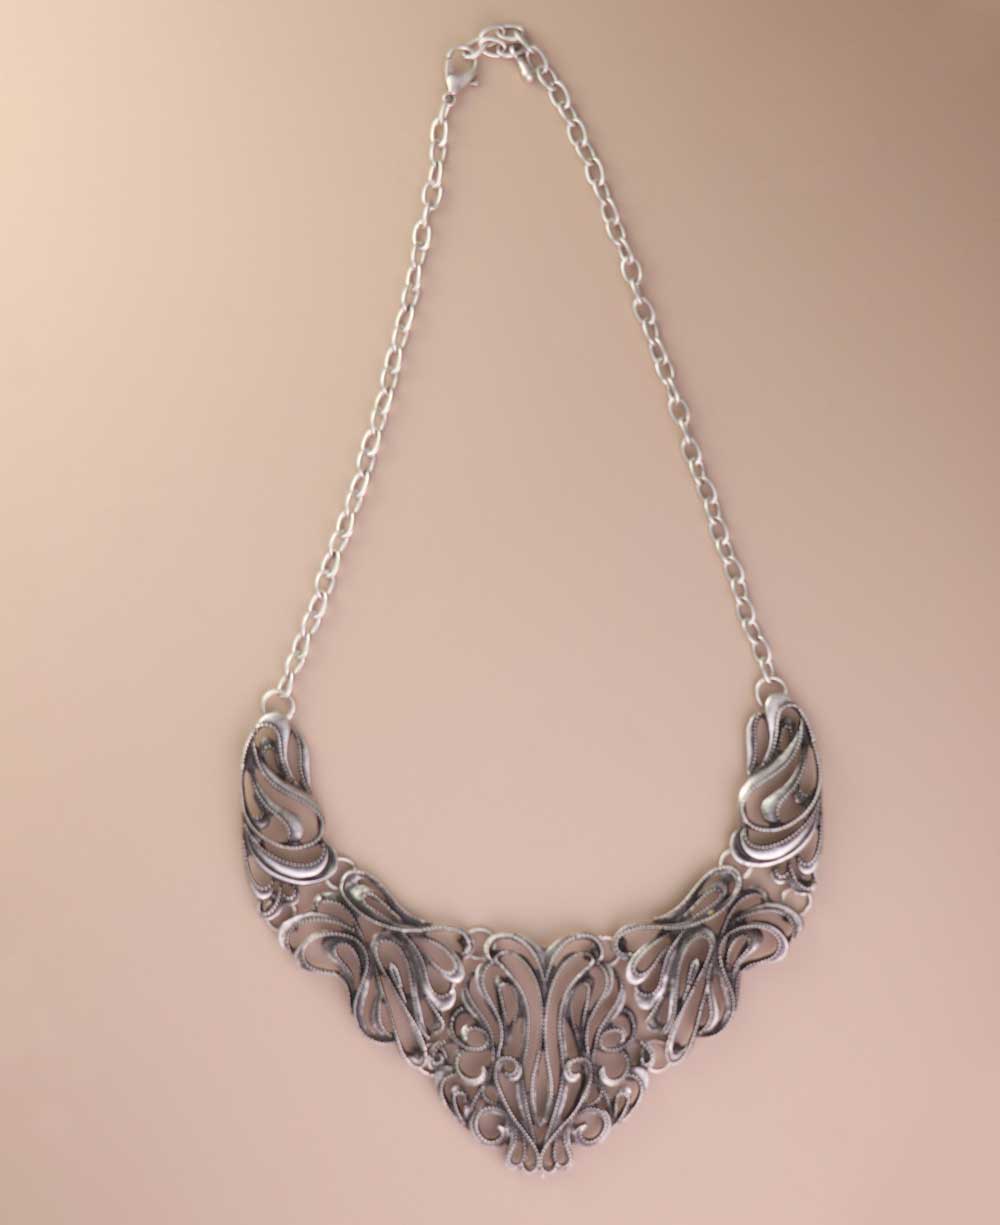 Swirly metal necklace